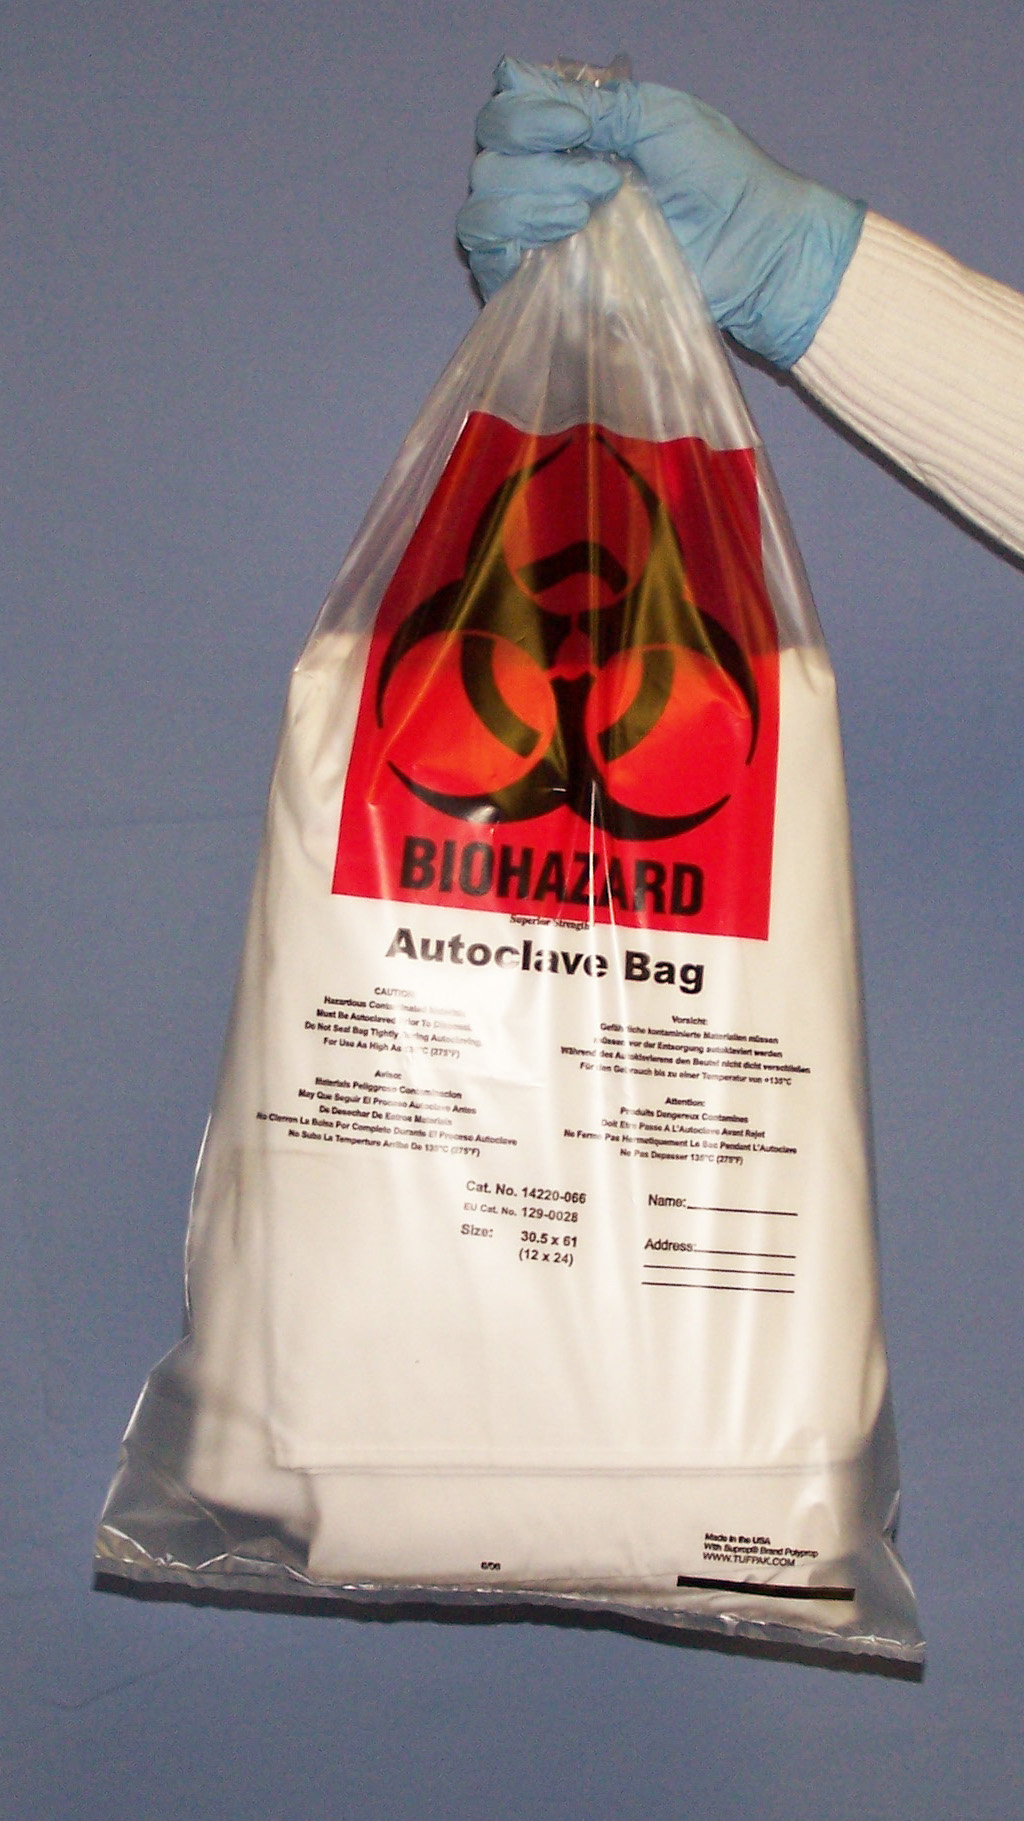 BIOHAZARD AUTOCLAVE BAGS 19X24 IN. CLEAR PP